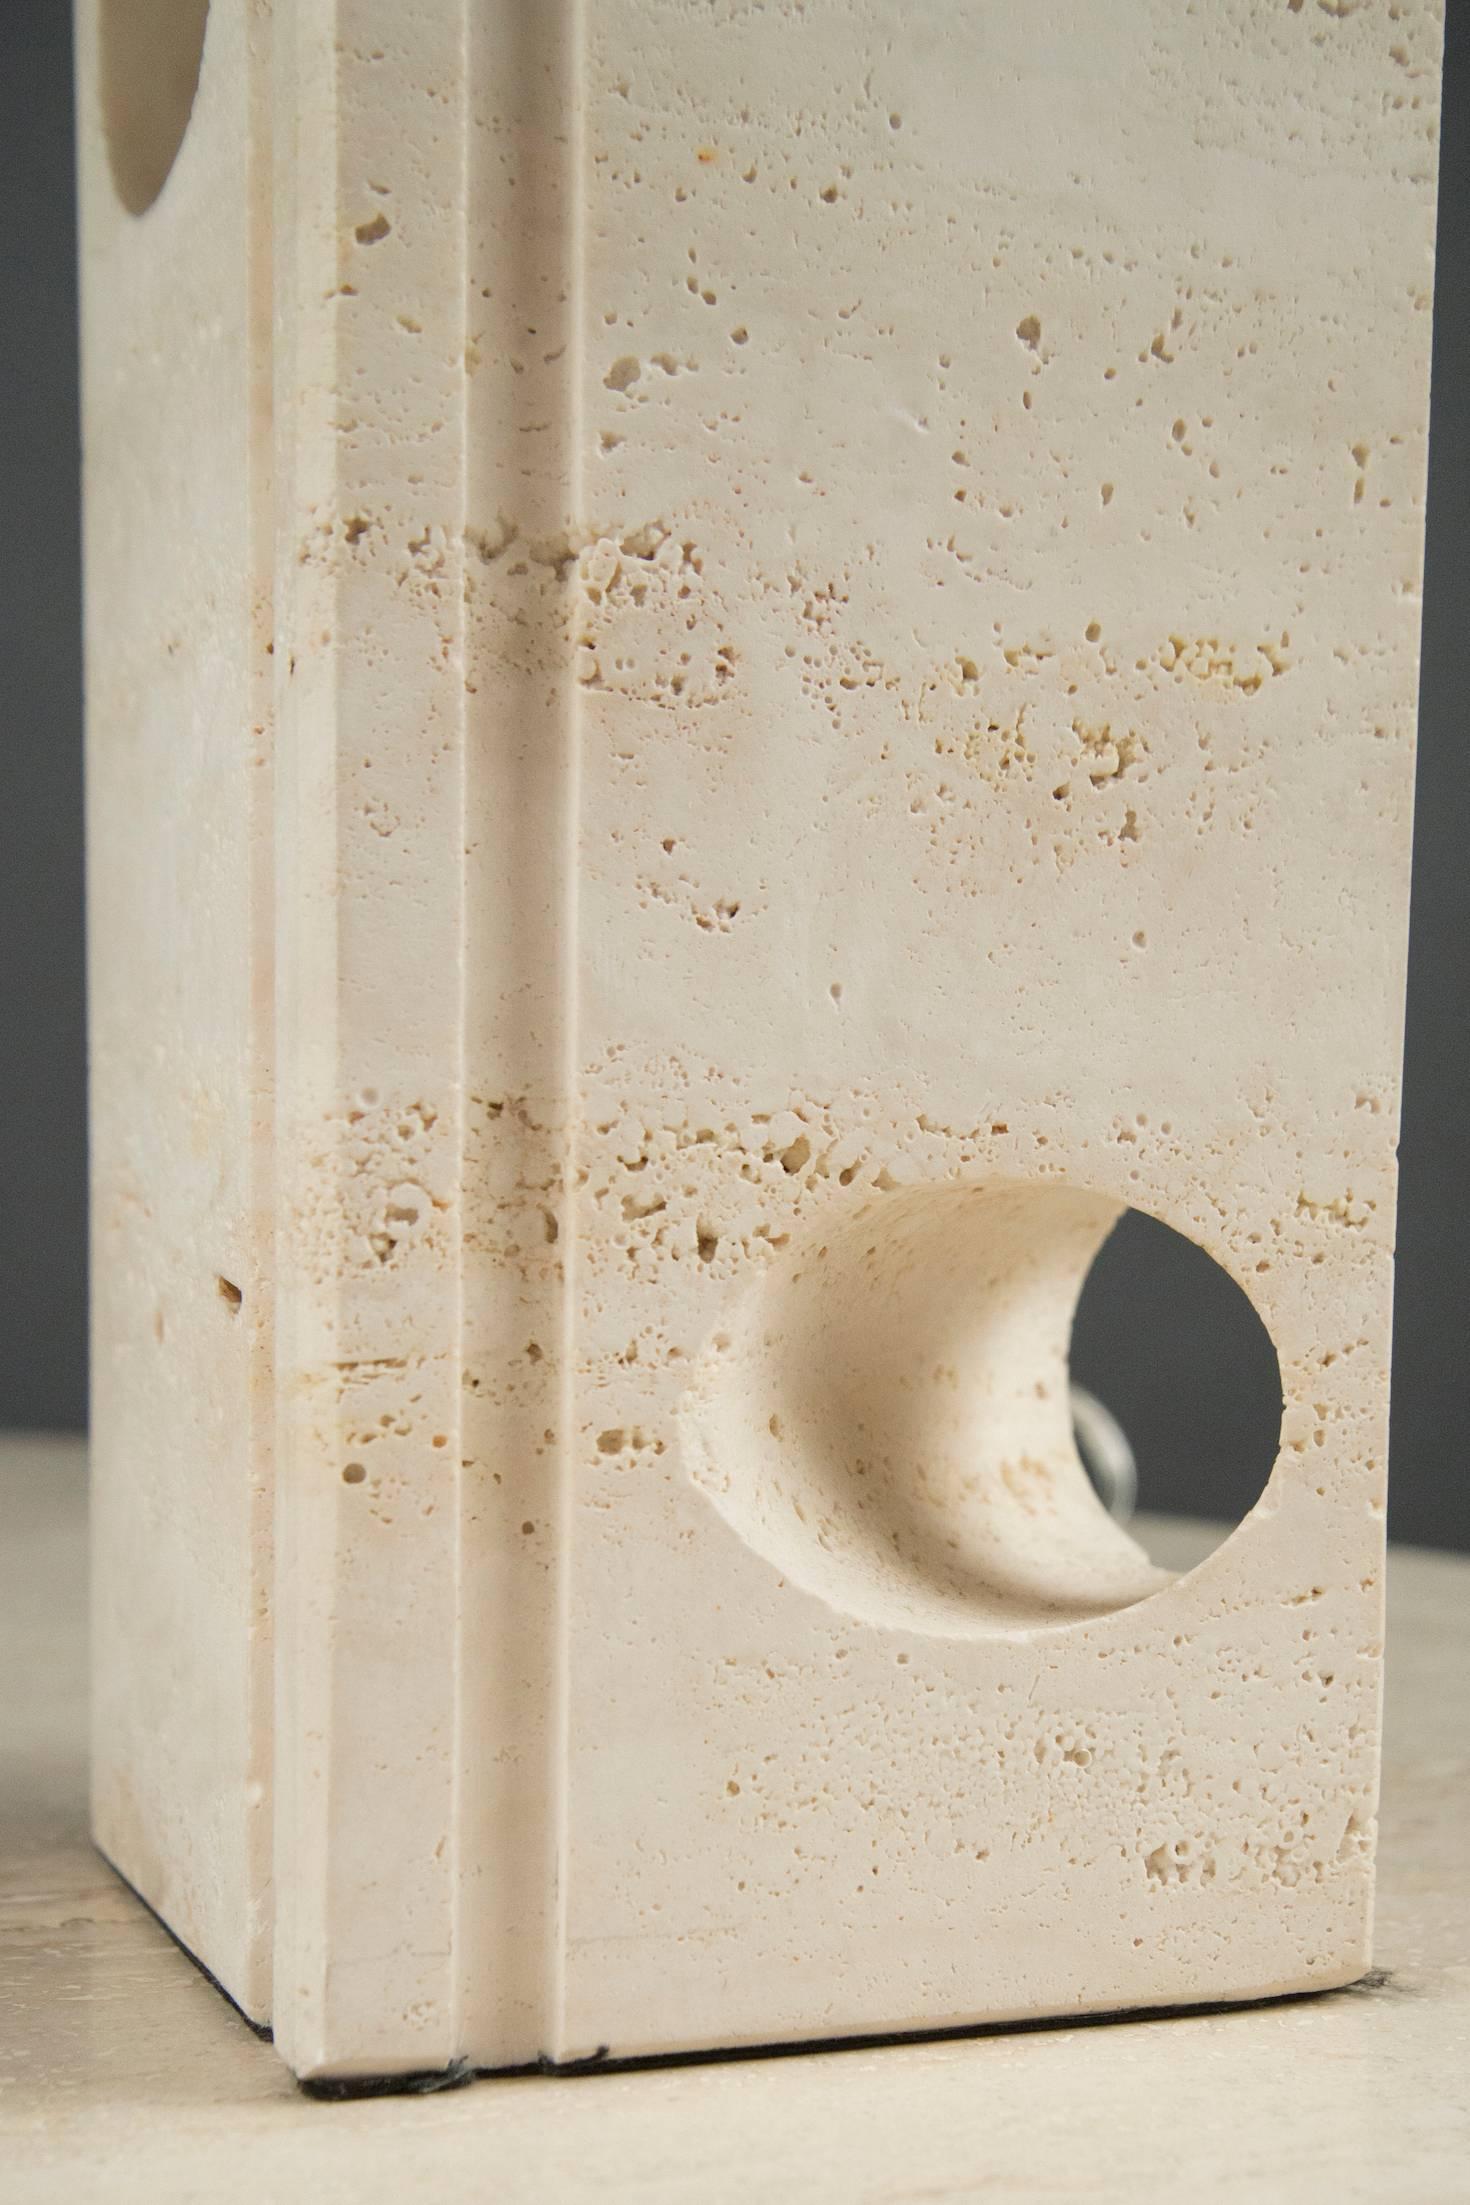 Travertine lamps, each composed of a rectangular block with vertical channelling and two diagonal holes.

Measures: Travertine Base height: 10.75”.
  

OUR REFERENCE N10549